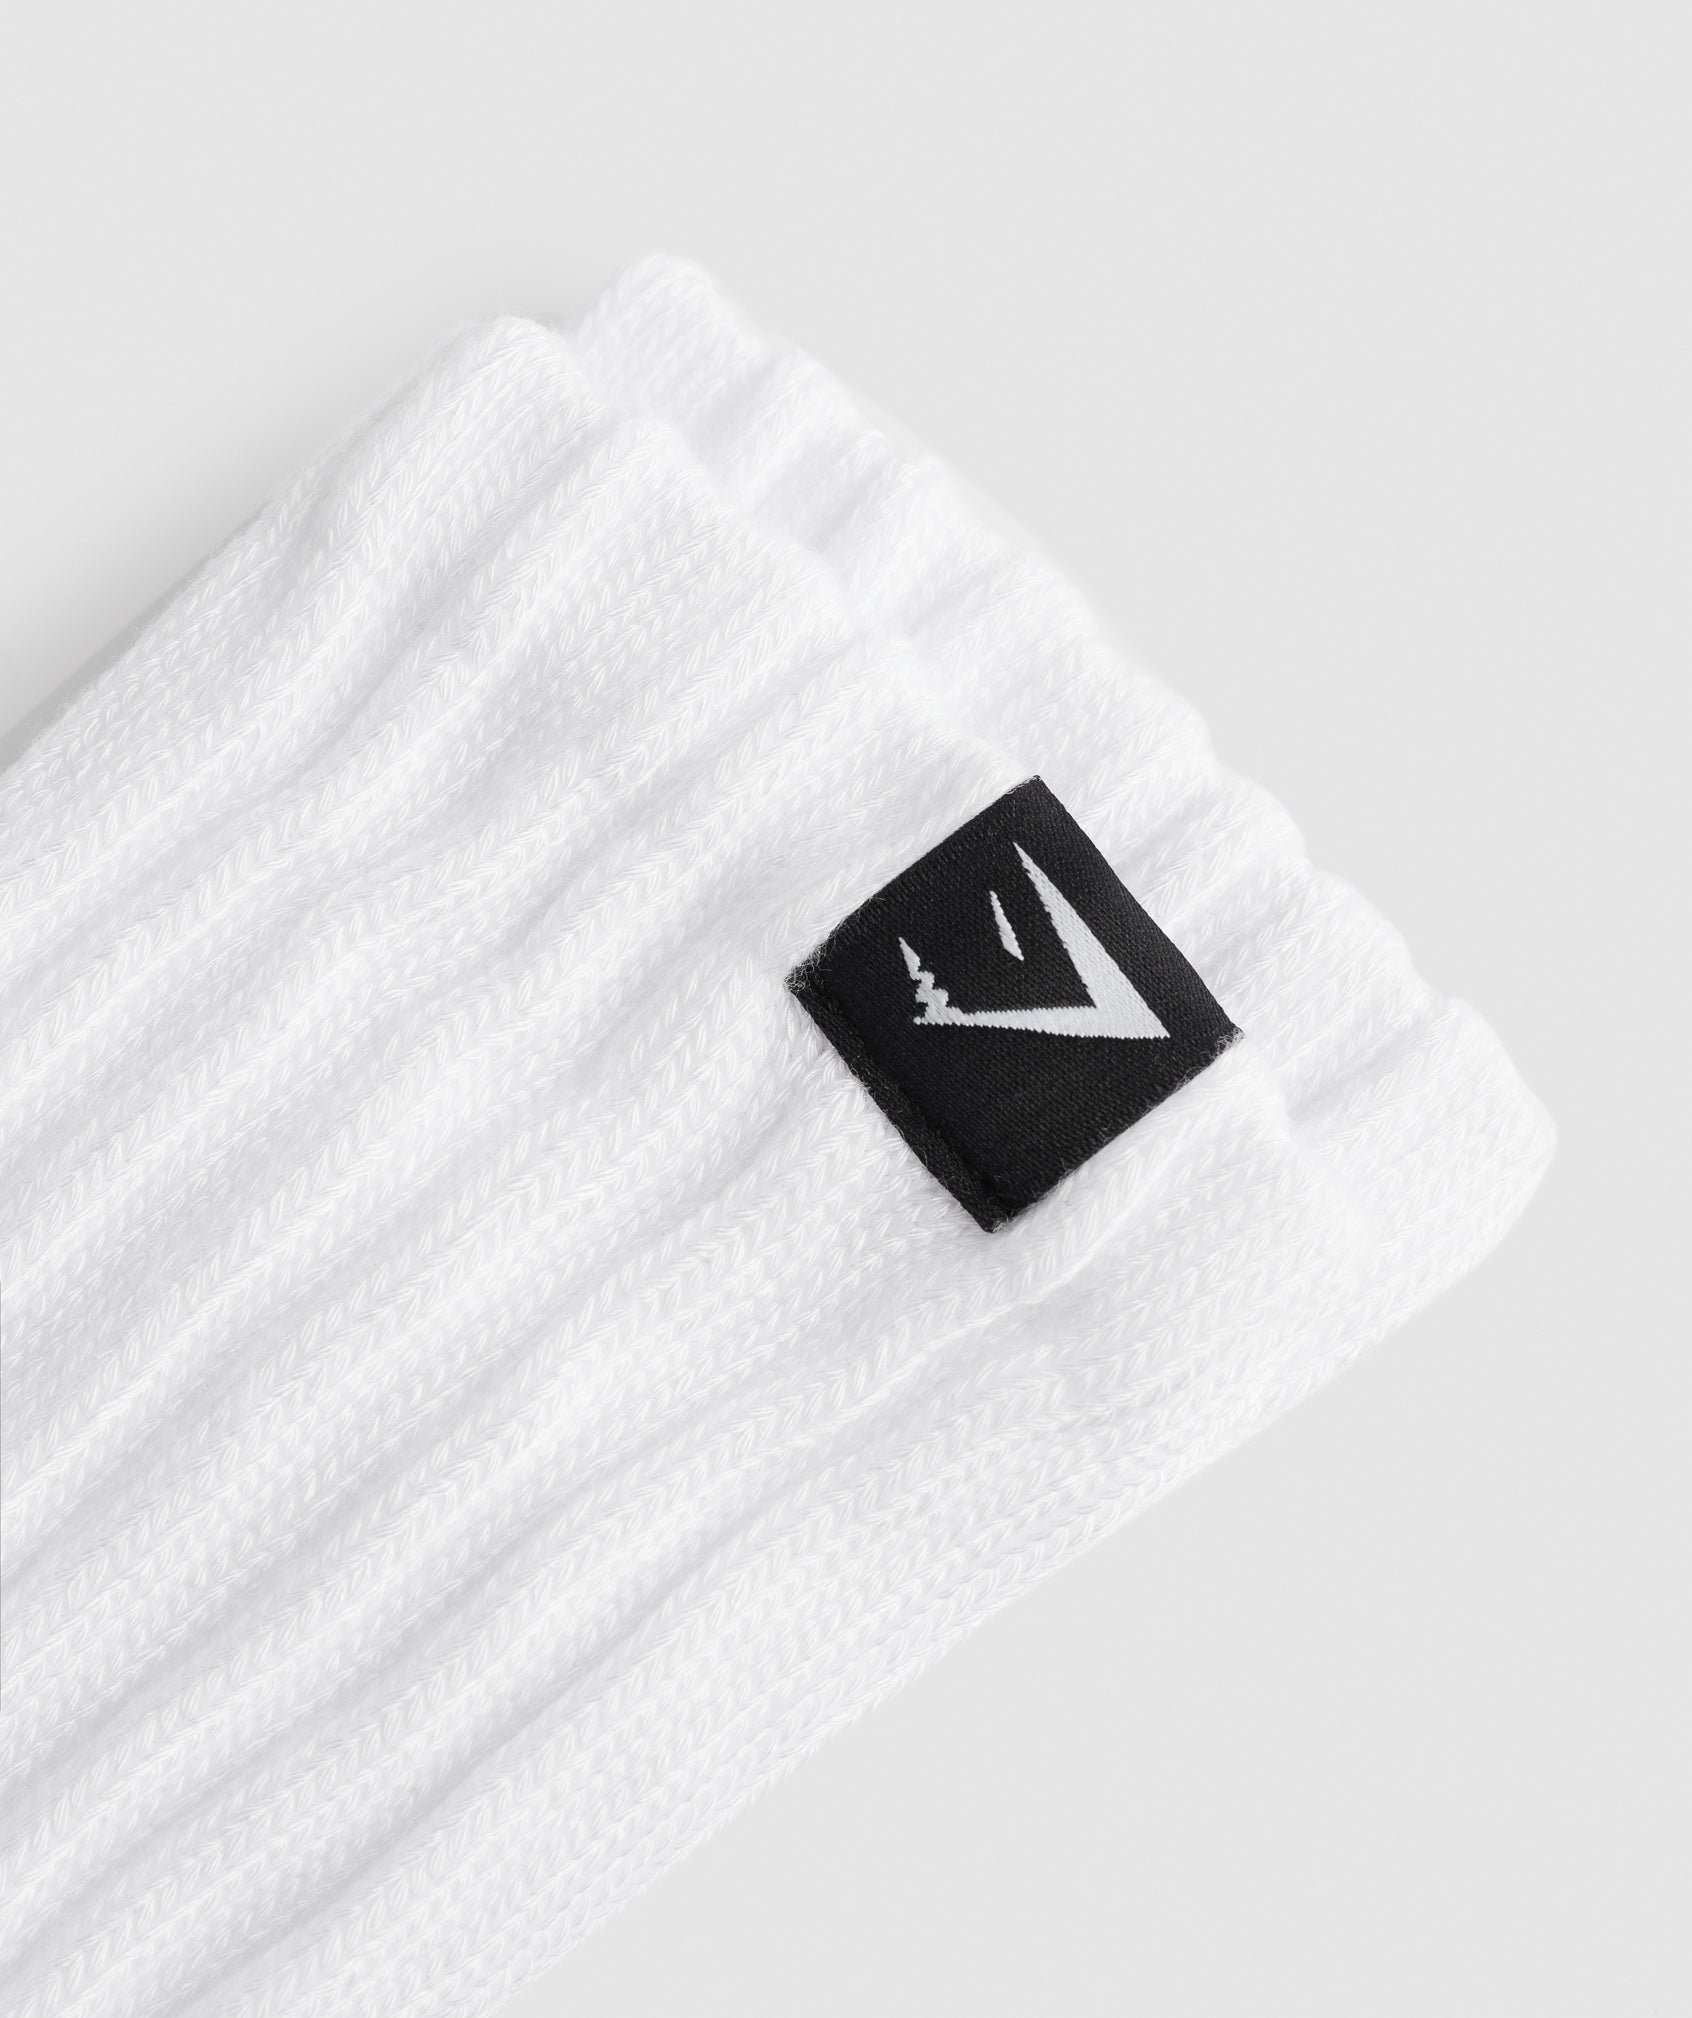 Comfy Rest Day Socks in White